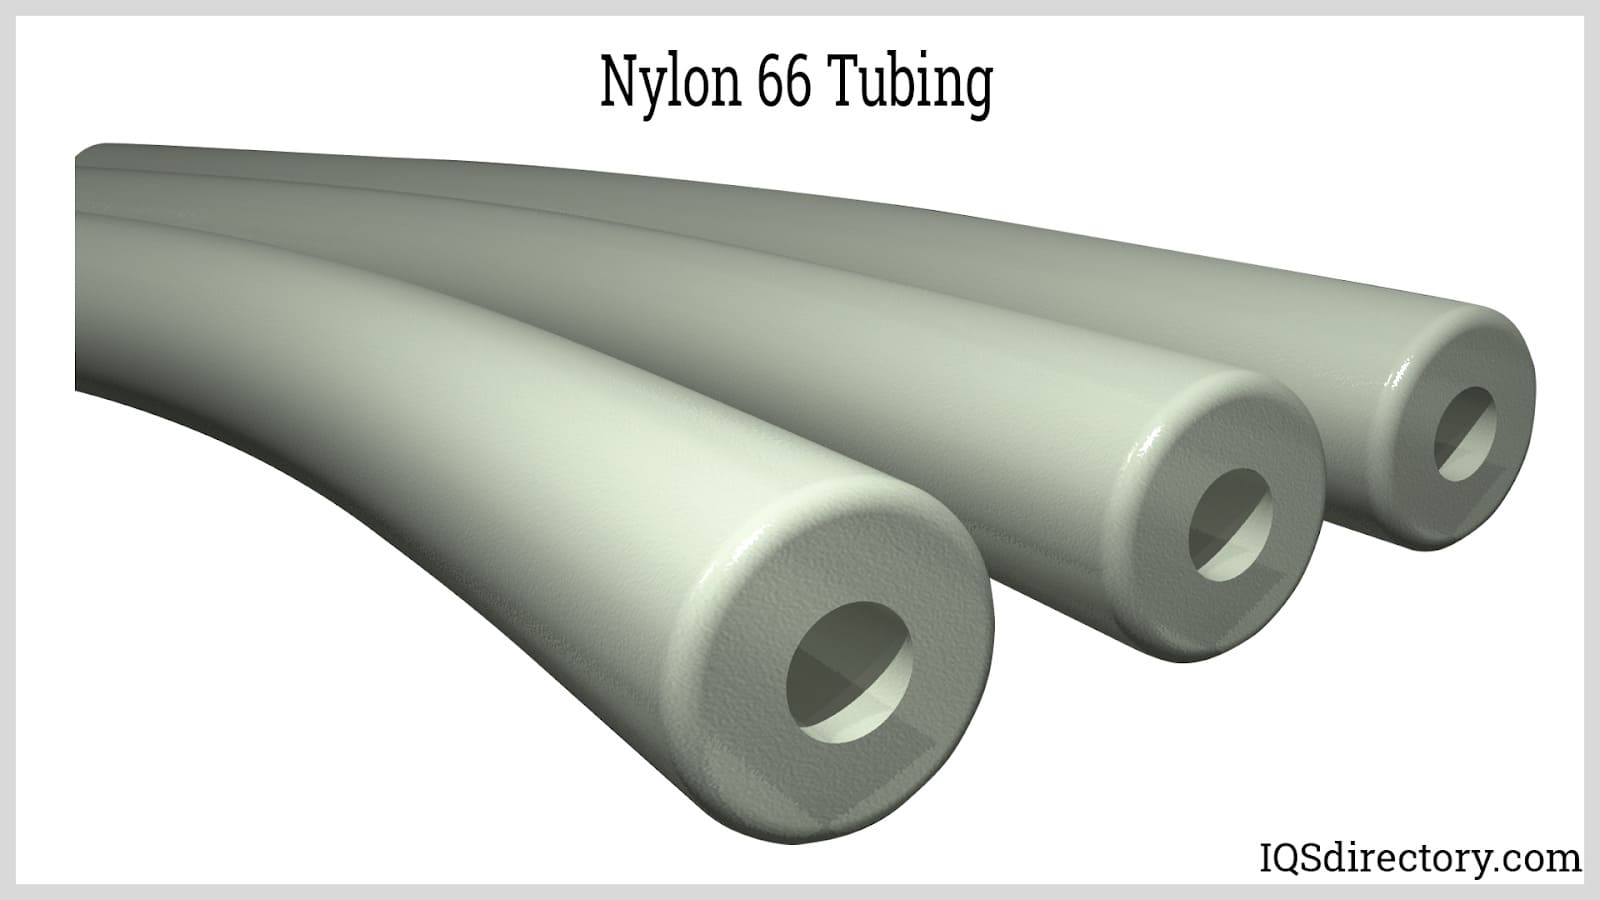 What is the melting point of the type of nylon used for making